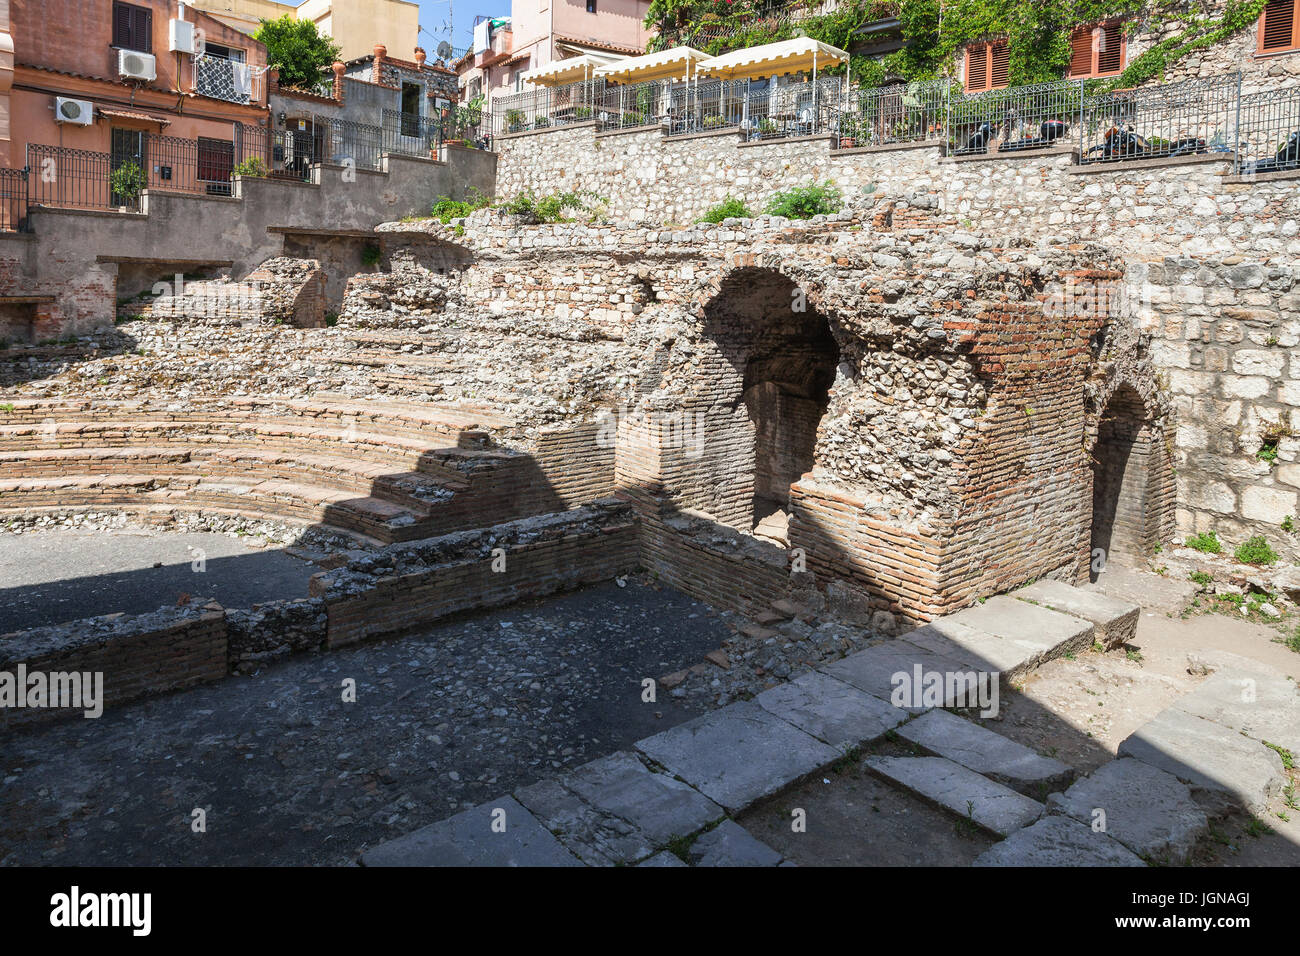 travel to Sicily, Italy - ruins of ancient roman theater Odeon in Taormina city. Stock Photo